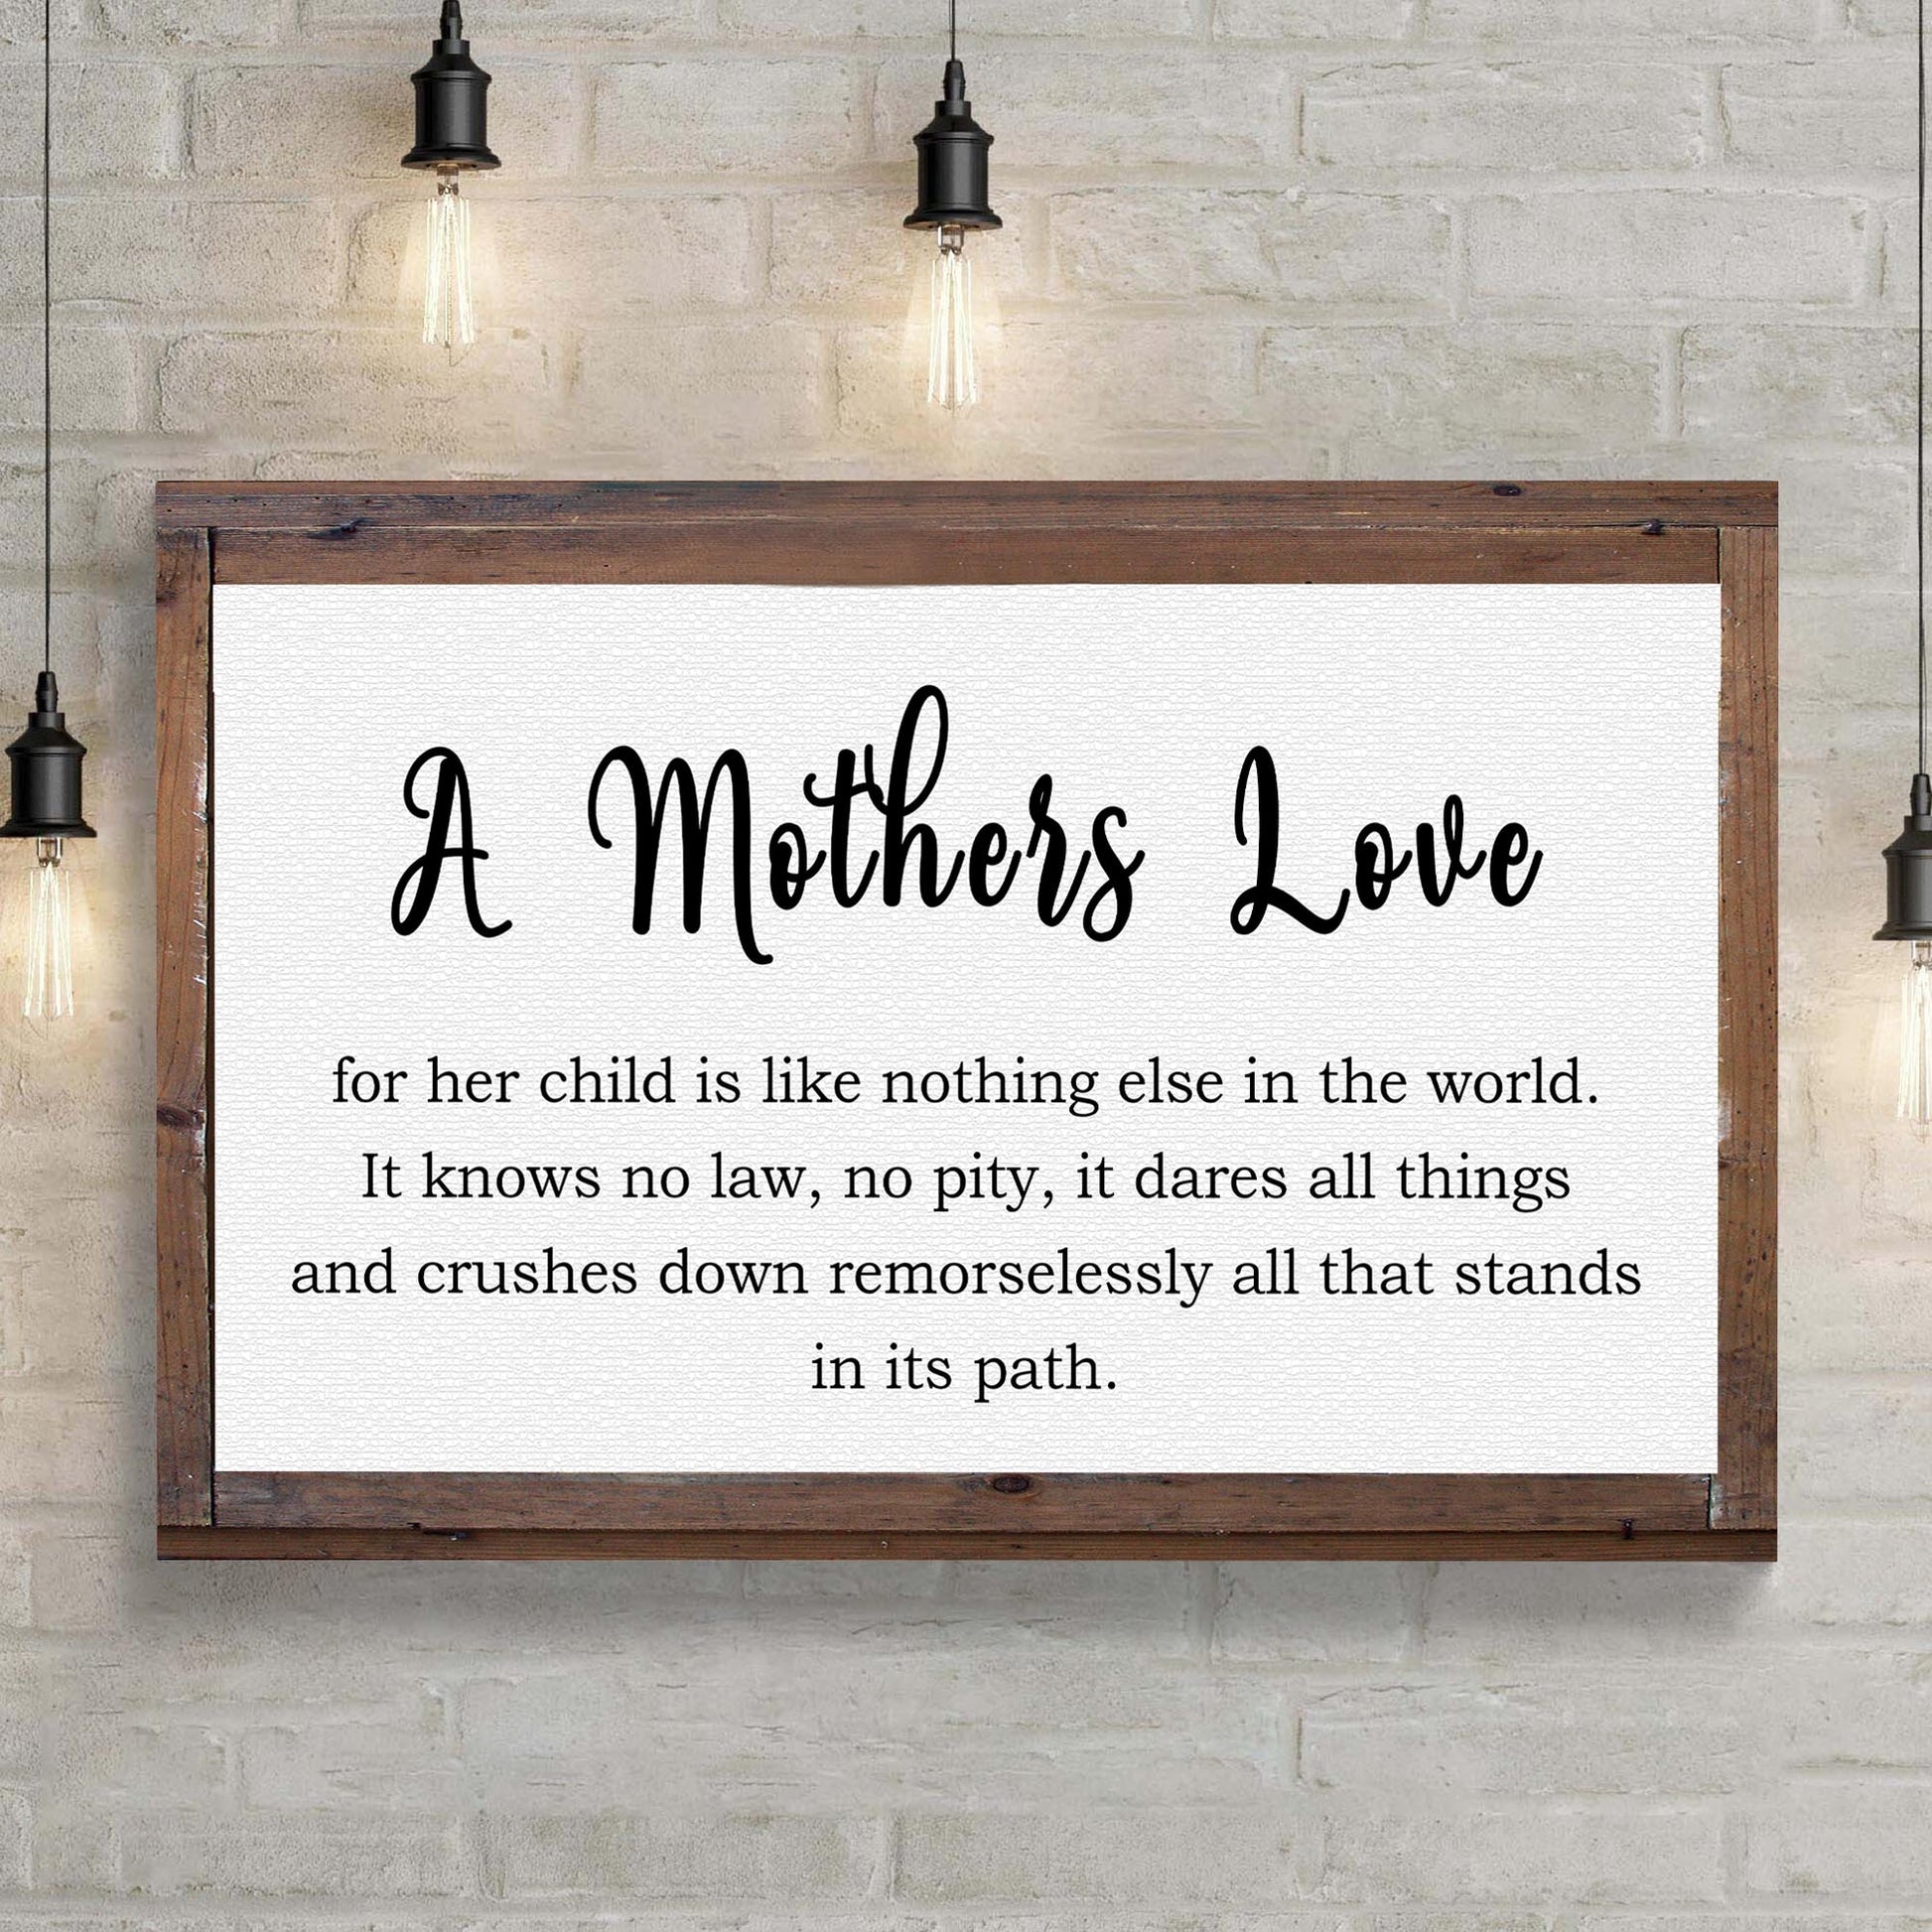 A Mother's Love For Her Child Sign - Image by Tailored Canvases